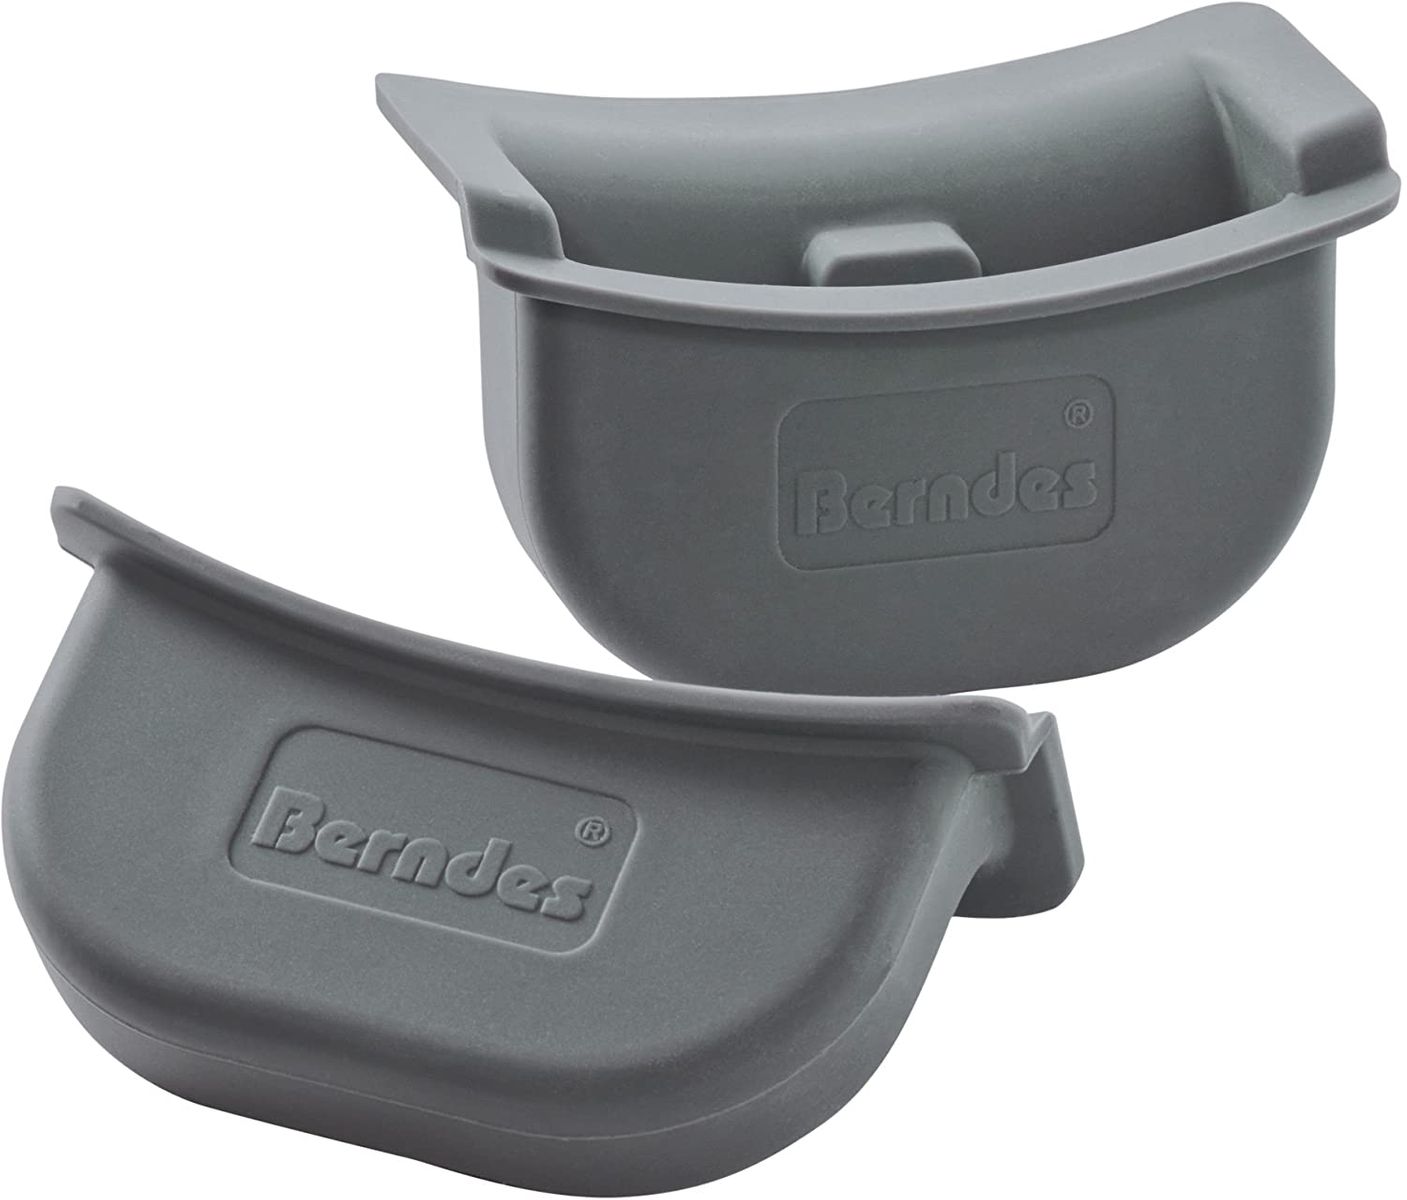 Berndes thermal silicone handles, 2 pieces, heat protection, gray, 002009, 20 x 10.5 x 5 cm